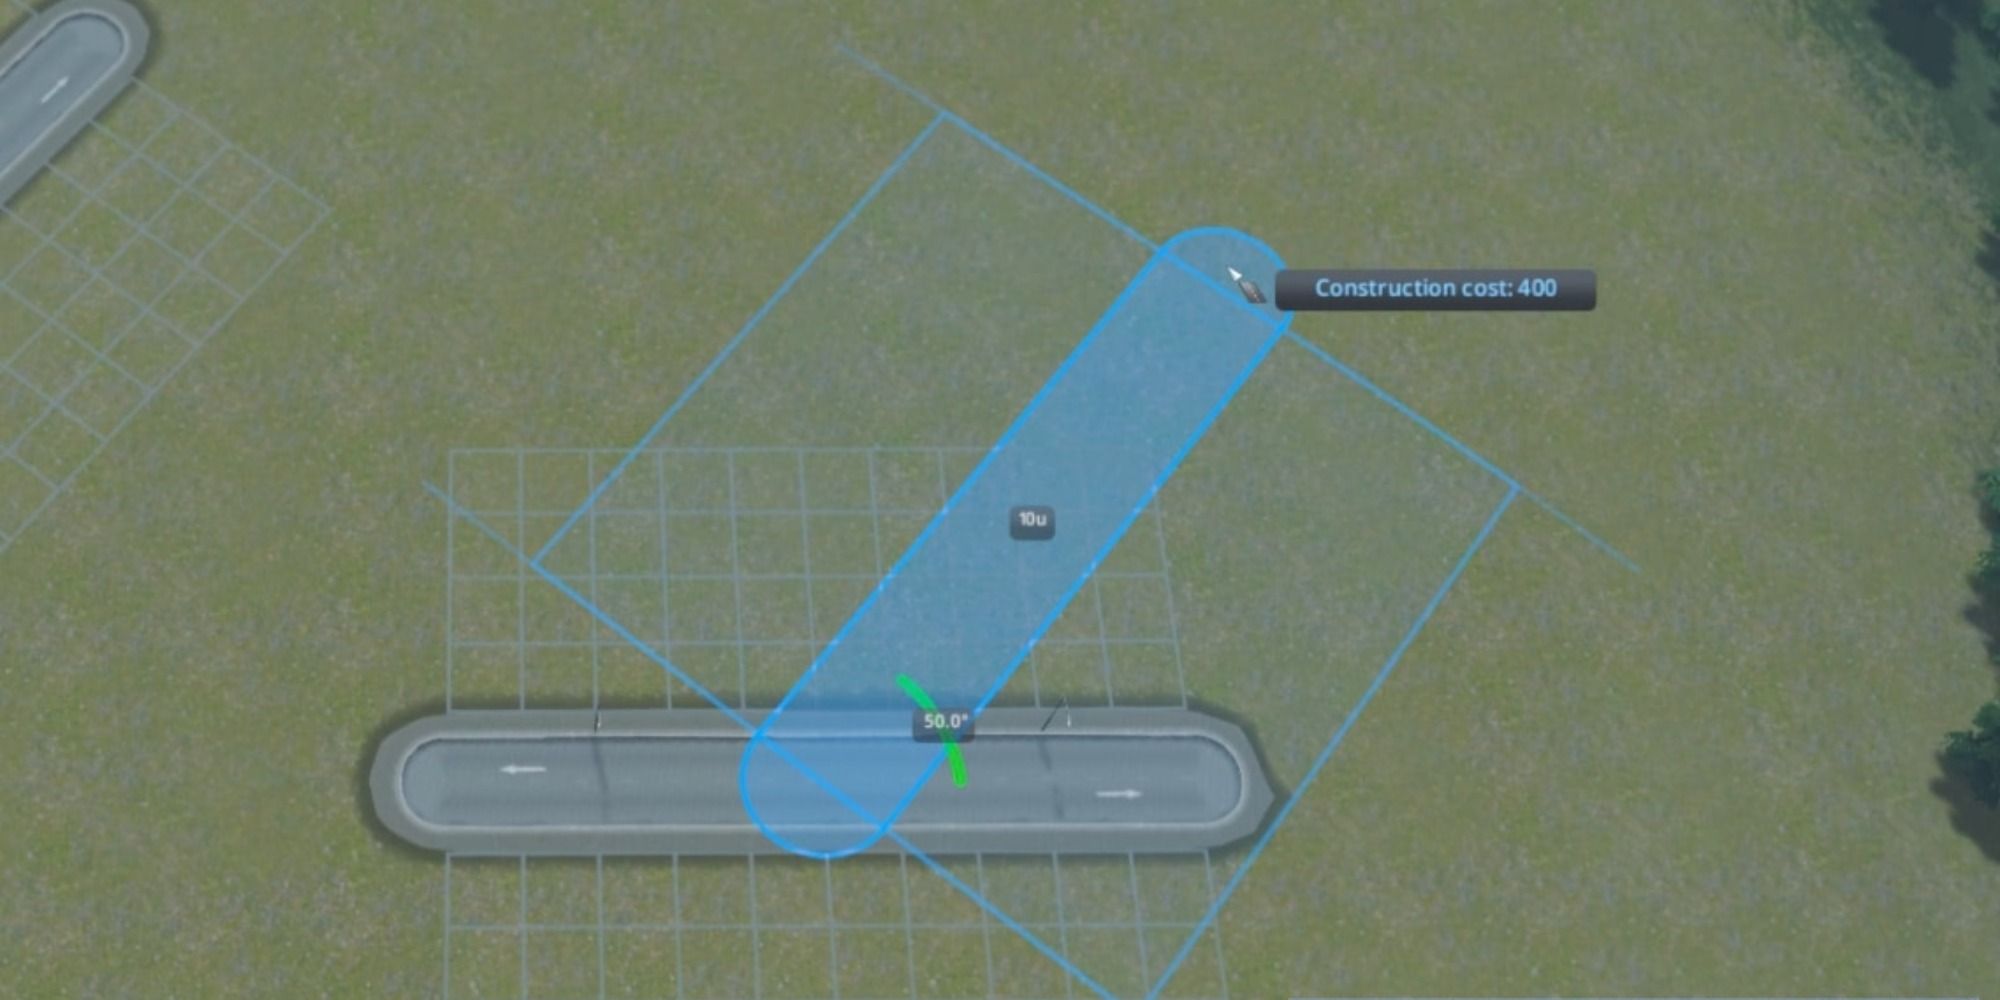 Cities Skylines Precision Engineering placing a road